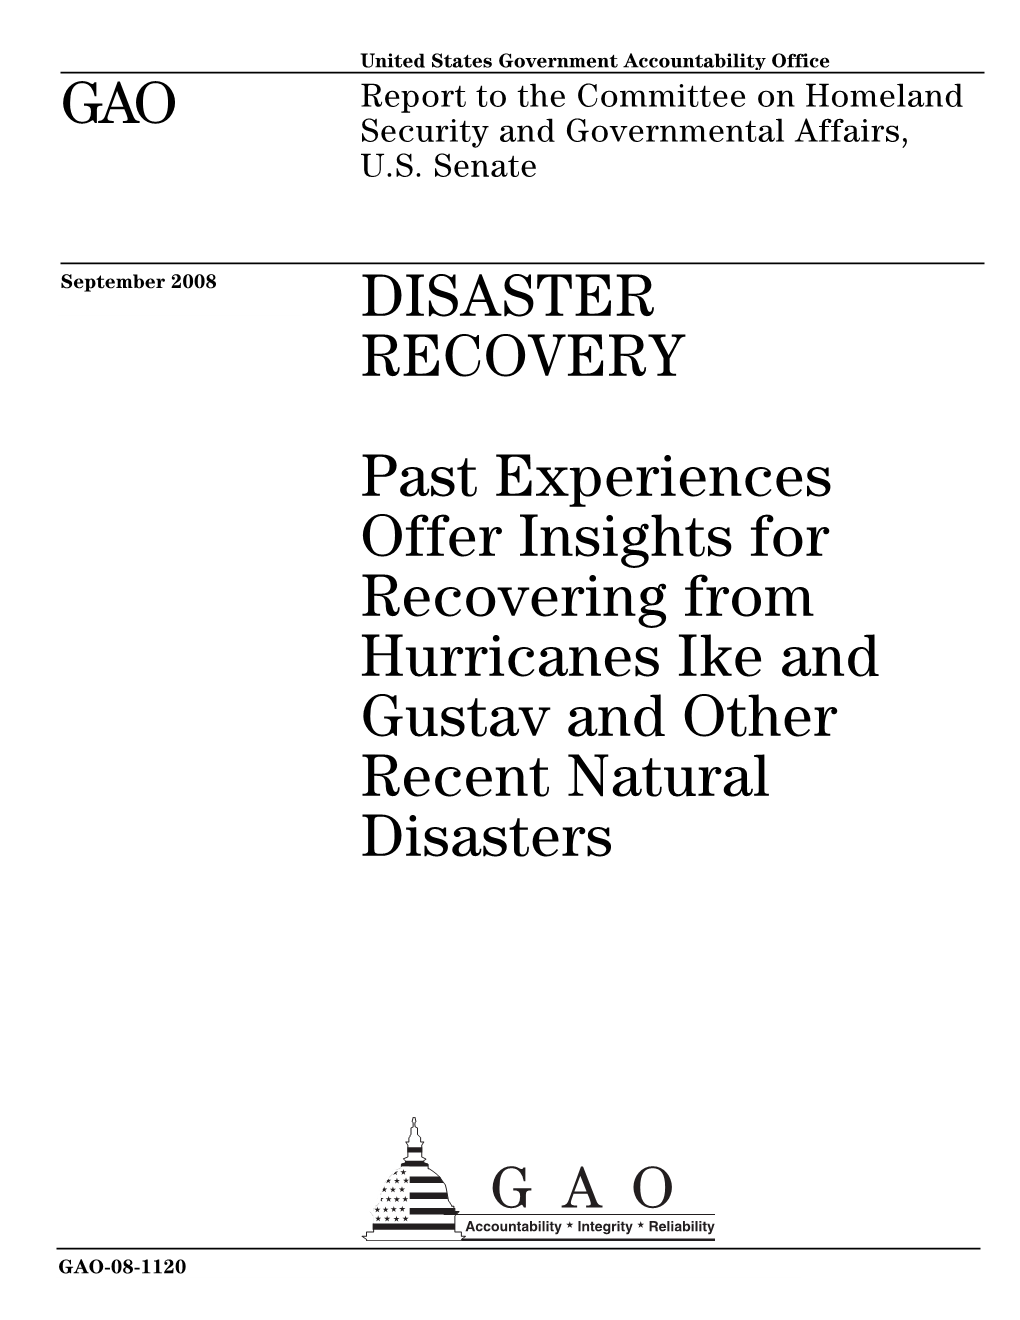 GAO-08-1120 Disaster Recovery: Past Experiences Offer Insights For